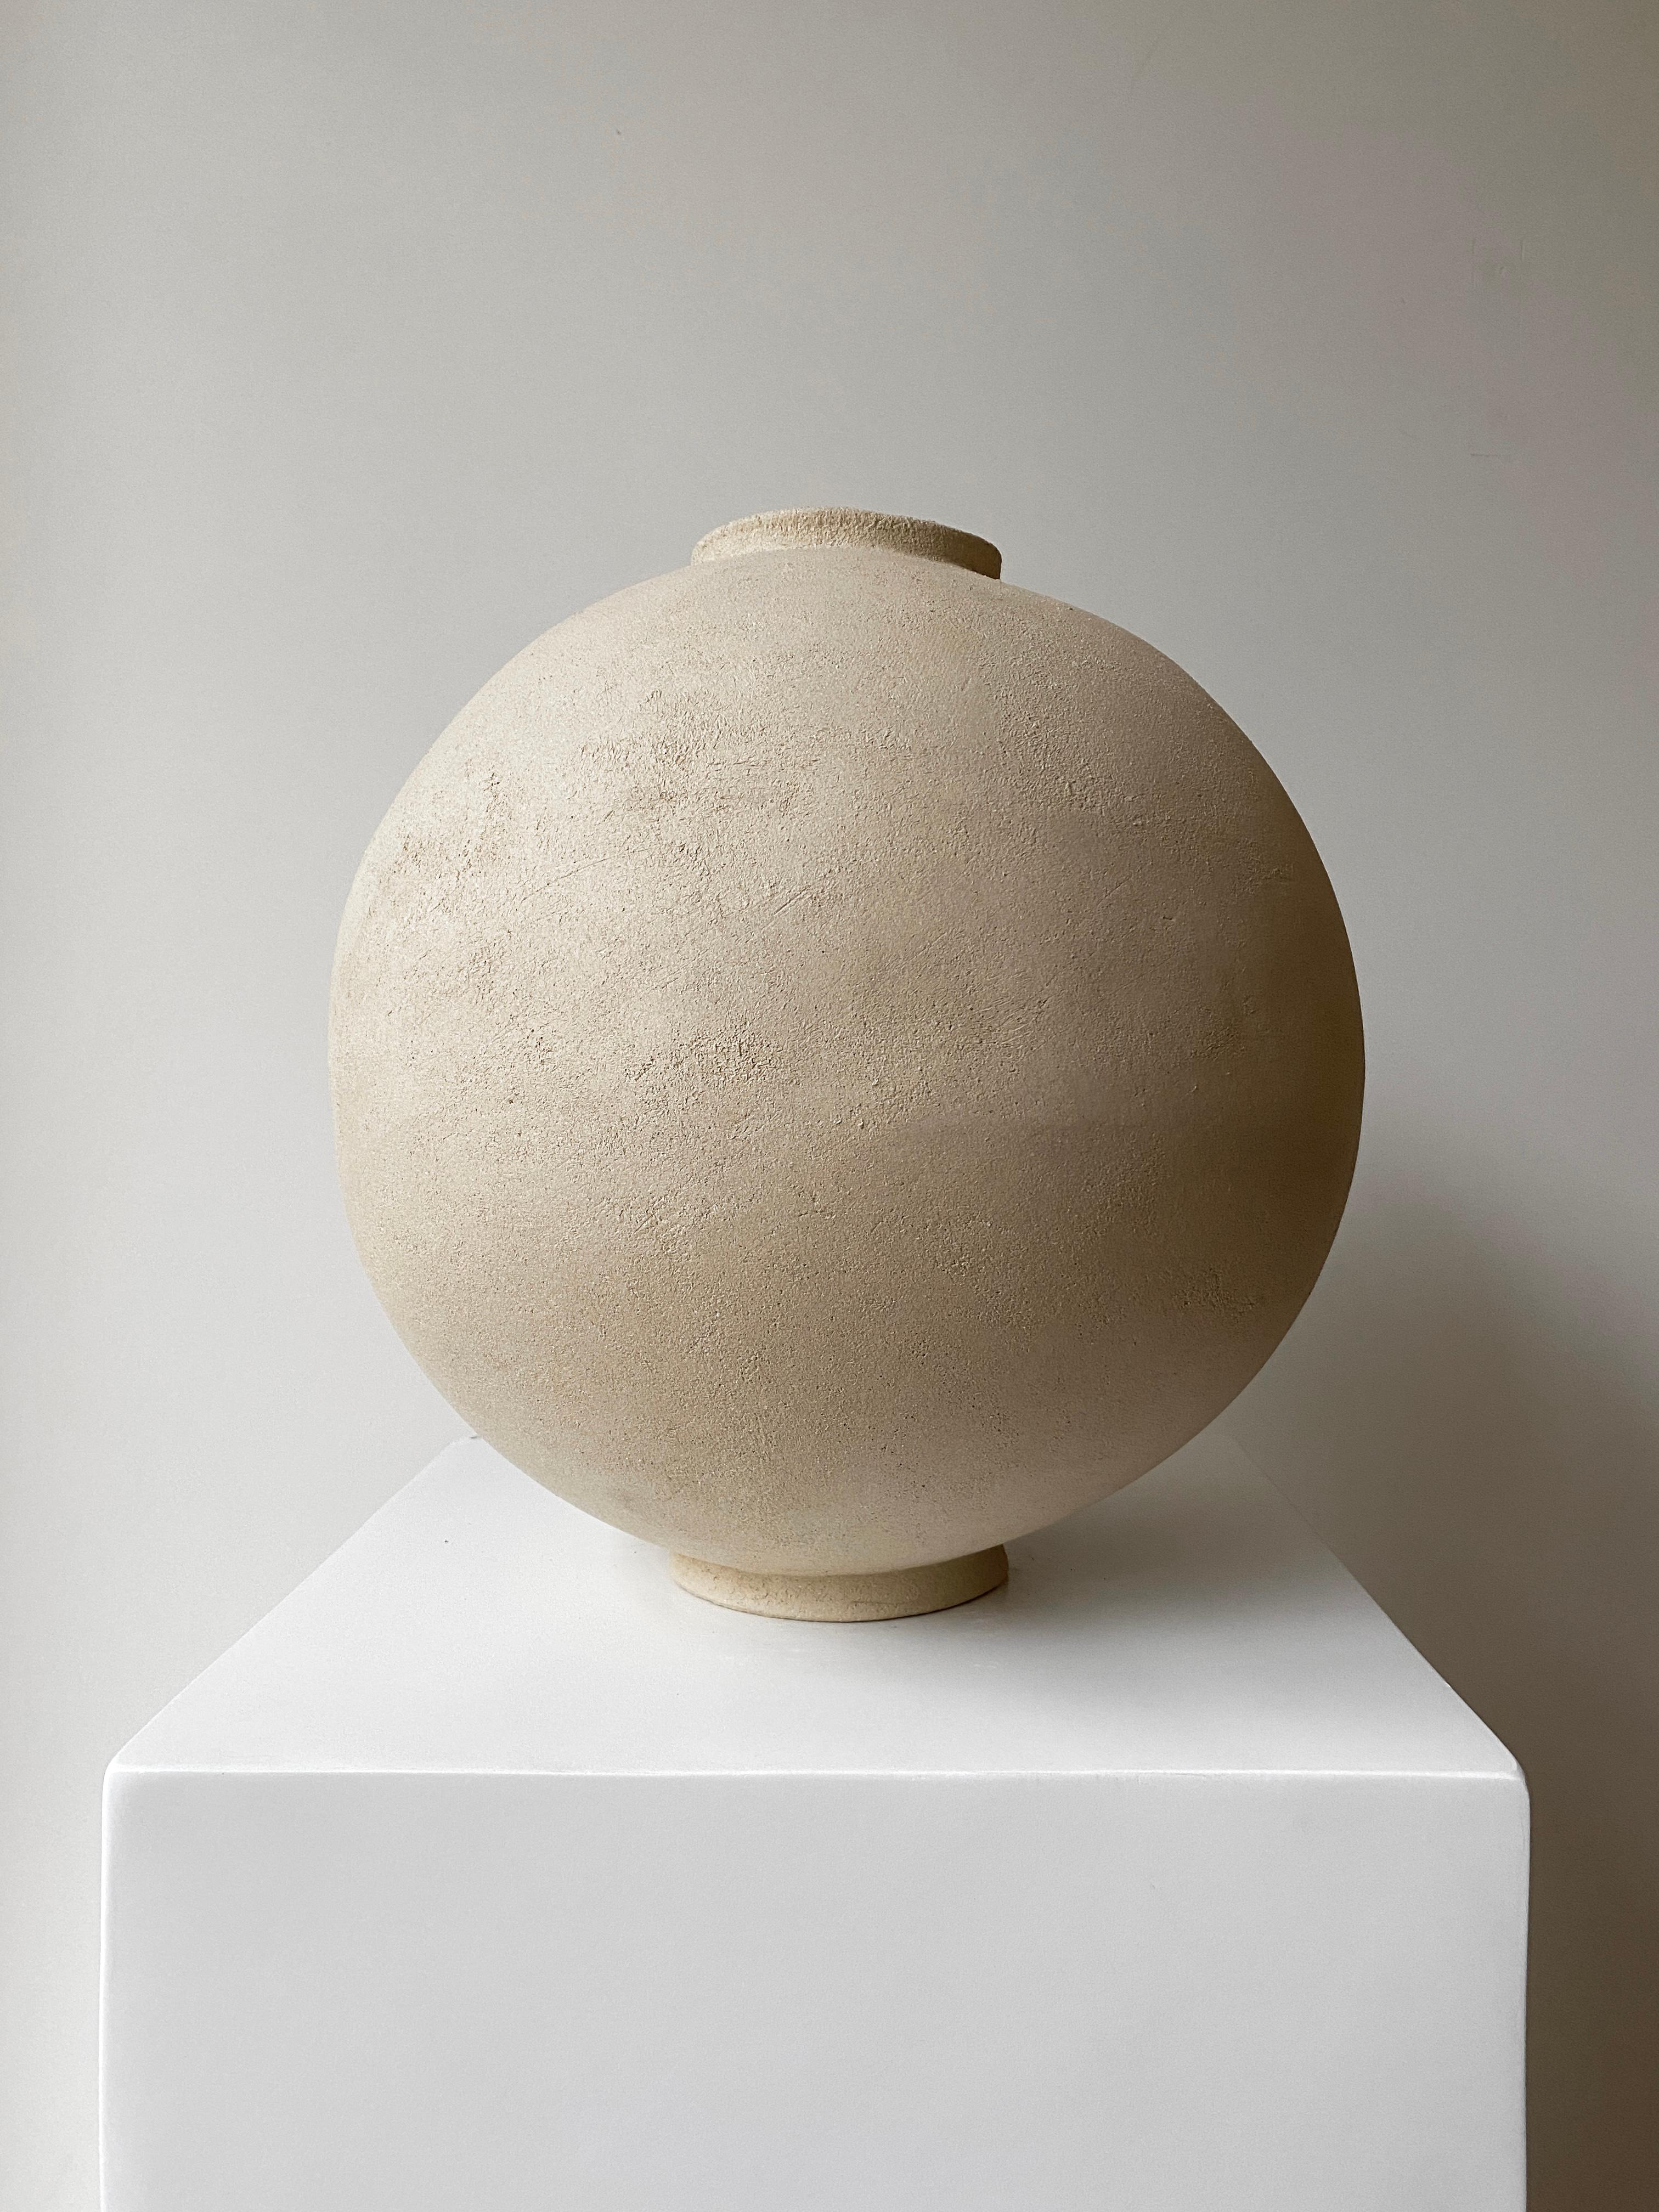 Sandstone moon jar by Laura Pasquino
Dimensions: Ø 33 x H 33 cm, opening Ø 10 cm
Materials: Stoneware ceramic
Finishing: Glazed matte interior, unglazed natural exterior
Colour: Off white

Laura Pasquino
Incorporating references from ancient Korean